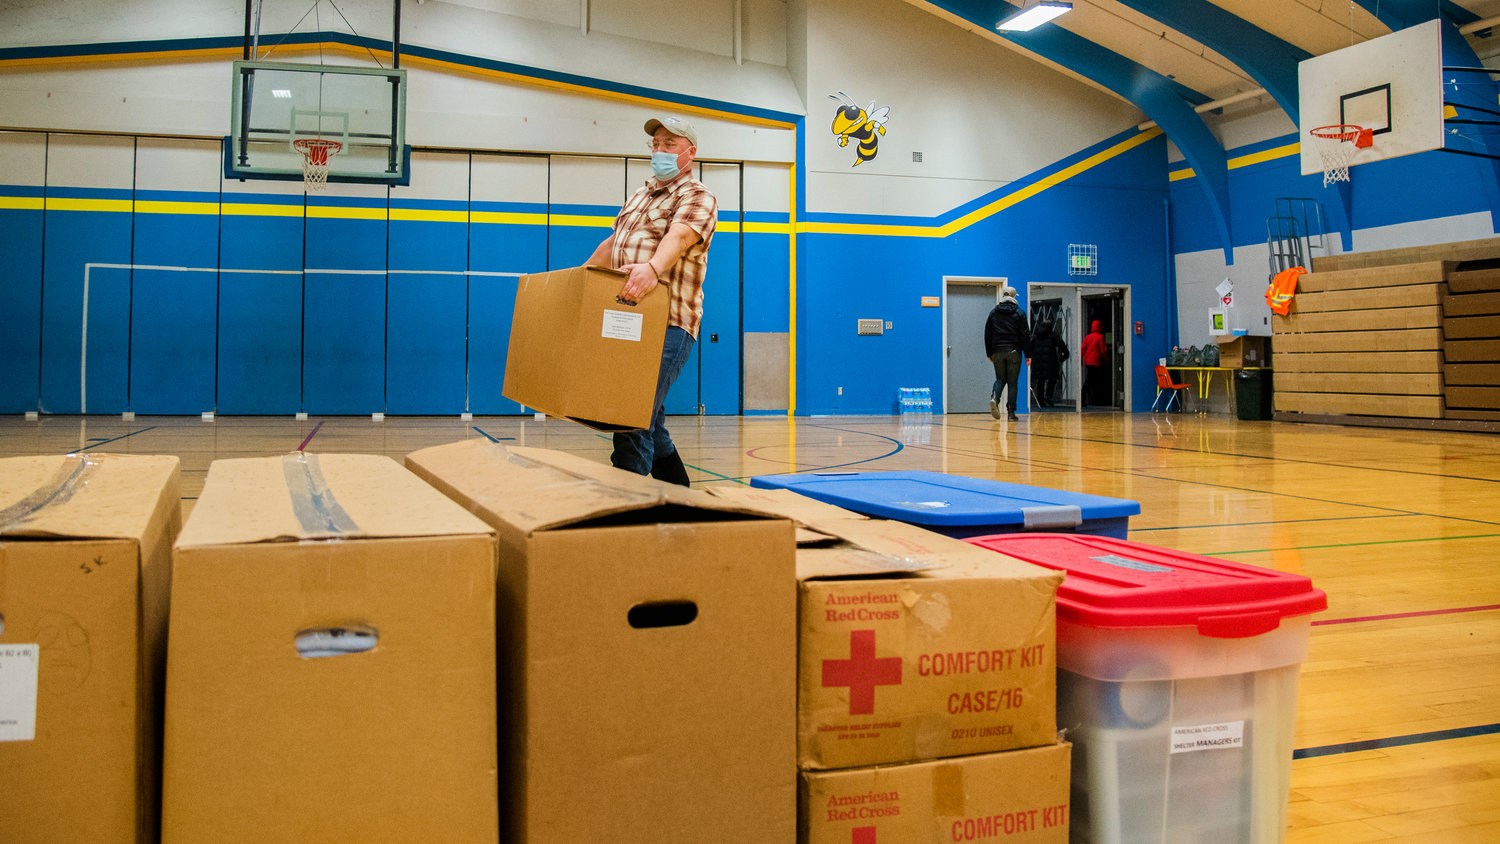 Public Health Director J.P. Anderson carries American Red Cross supplies into Centralia Middle School Thursday evening.